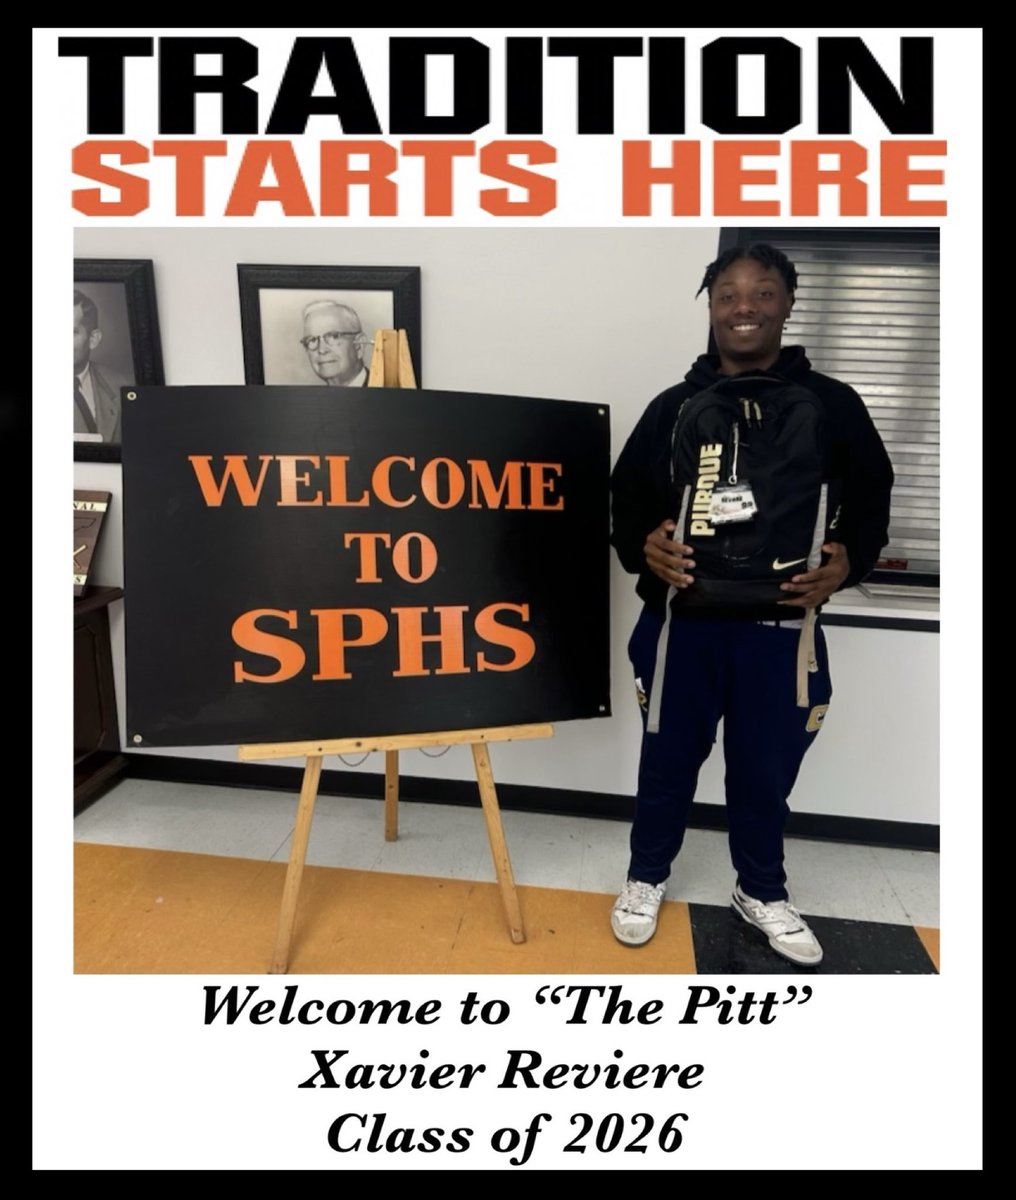 Please welcome the Reviere family to South Pittsburg. Xavier is a class of 2026 student athlete. Welcome to The Pitt! #ThePitt